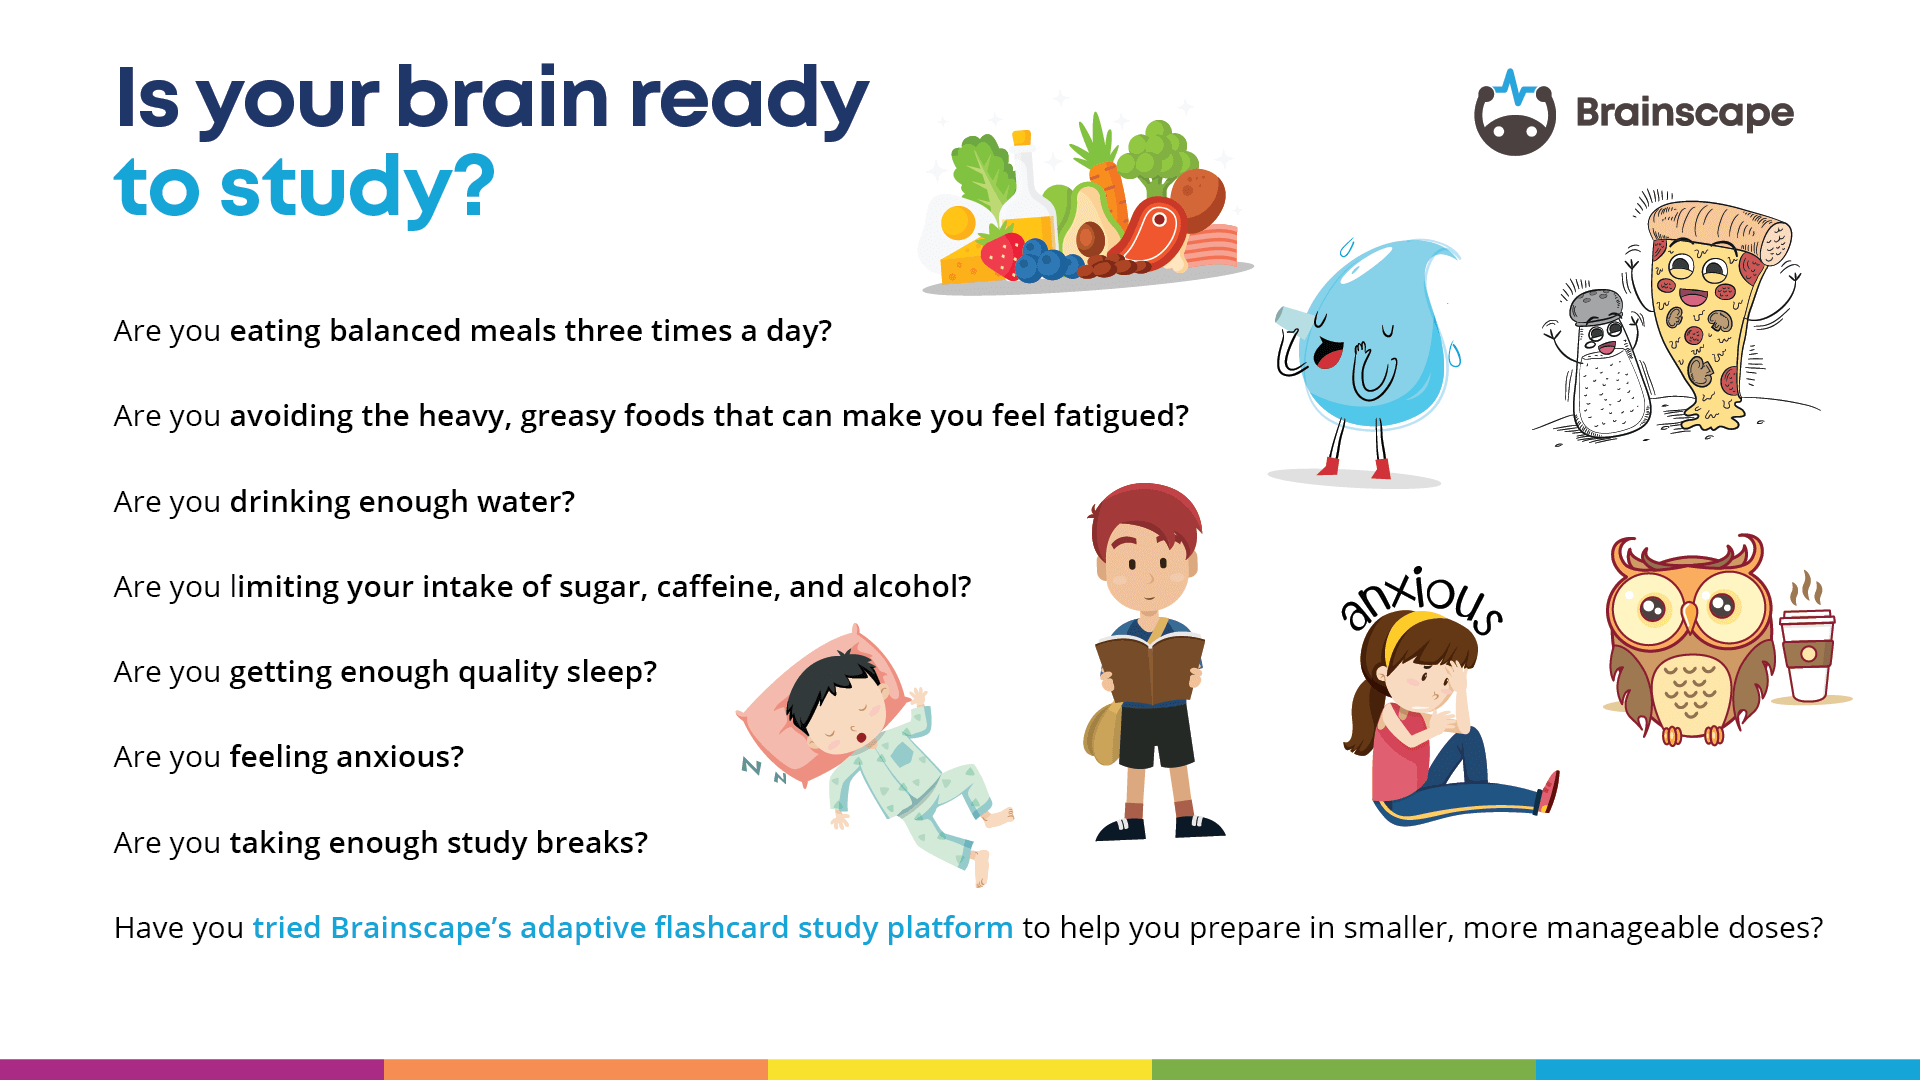 Tips on preparing your brain for study